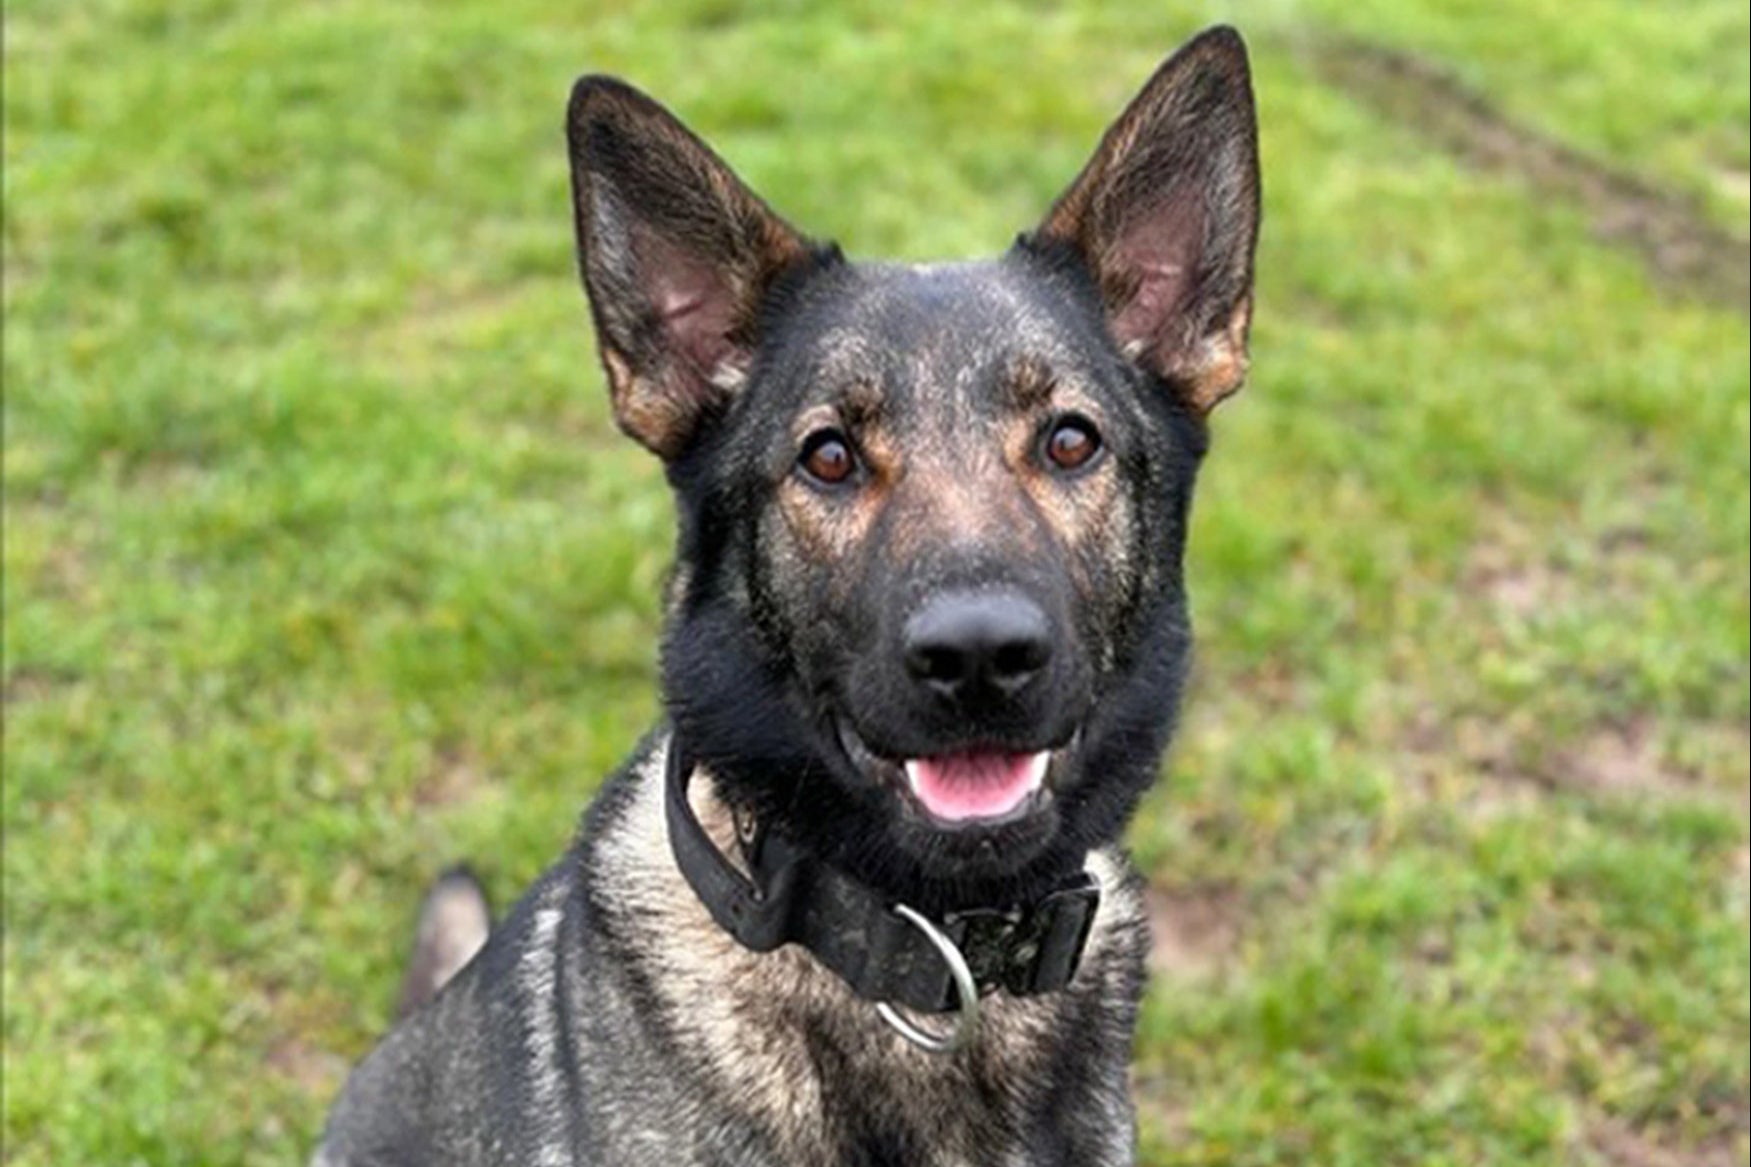 PD Zyla died after chasing a suspect into water at the Watermead Country Park in Birstall, near Leicester